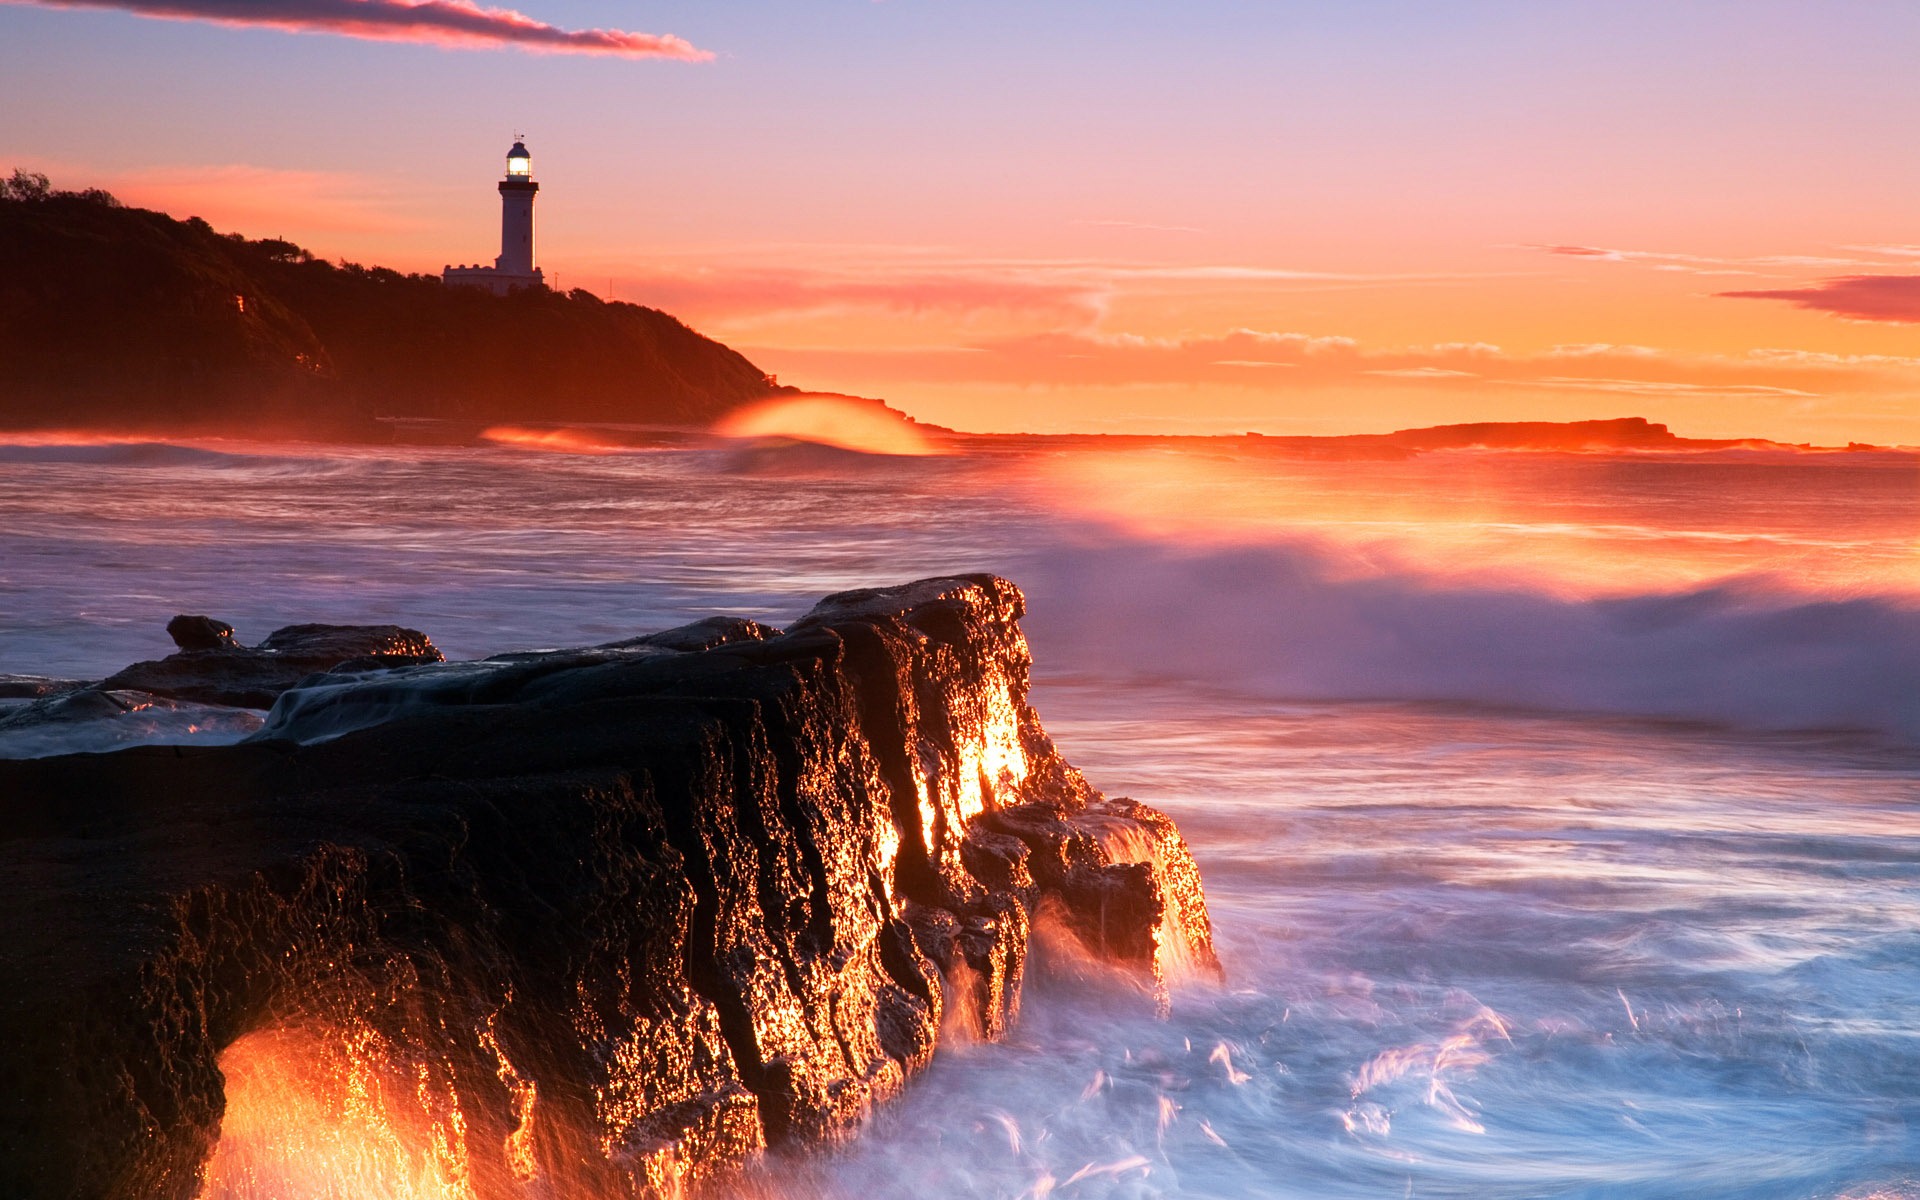 Windows 7 Wallpapers: Lighthouses #1 - 1920x1200